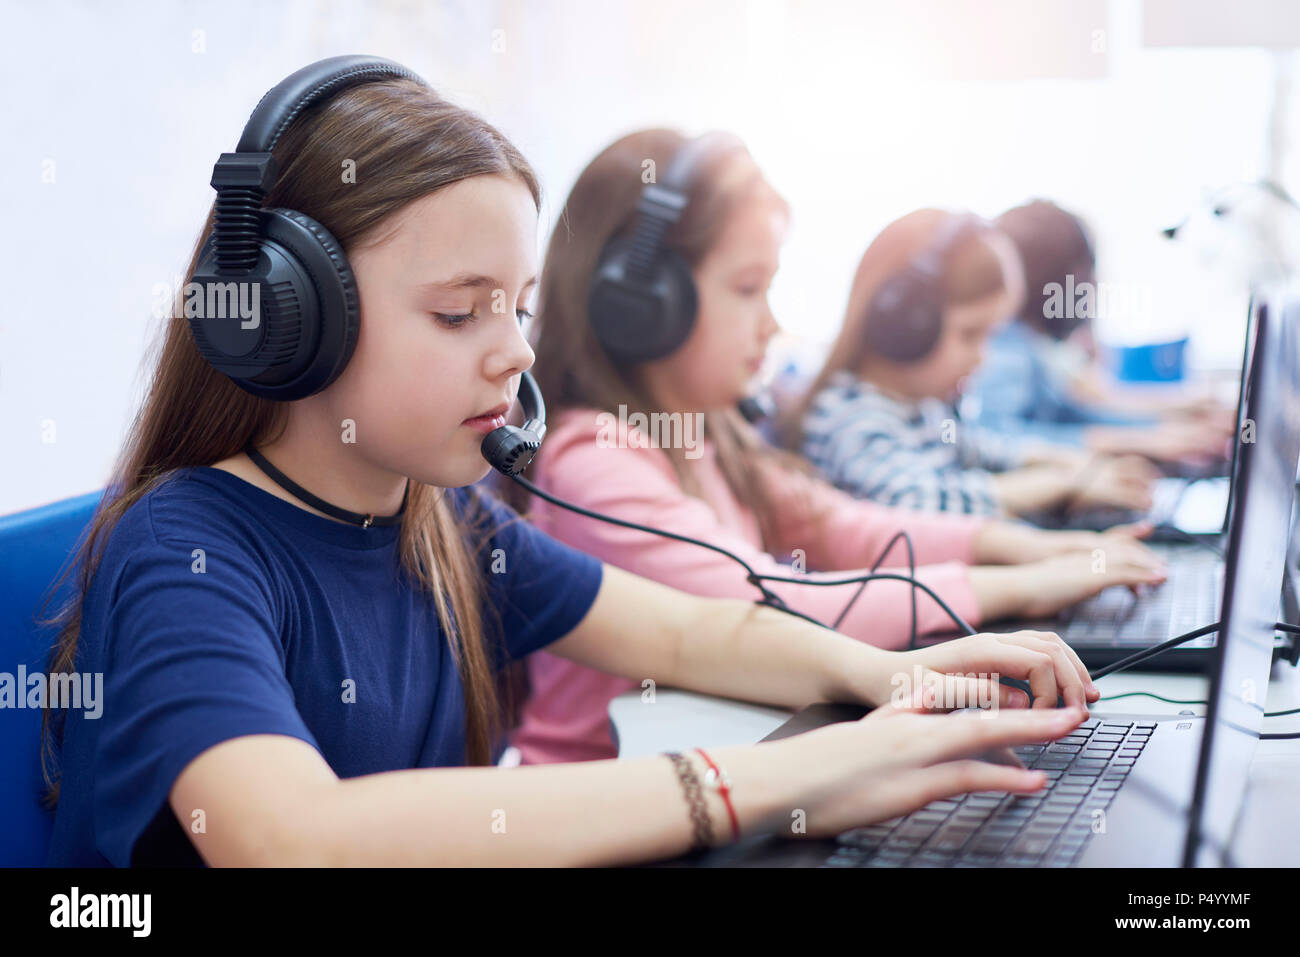 Pupils wearing headsets and using laptops in school Stock Photo